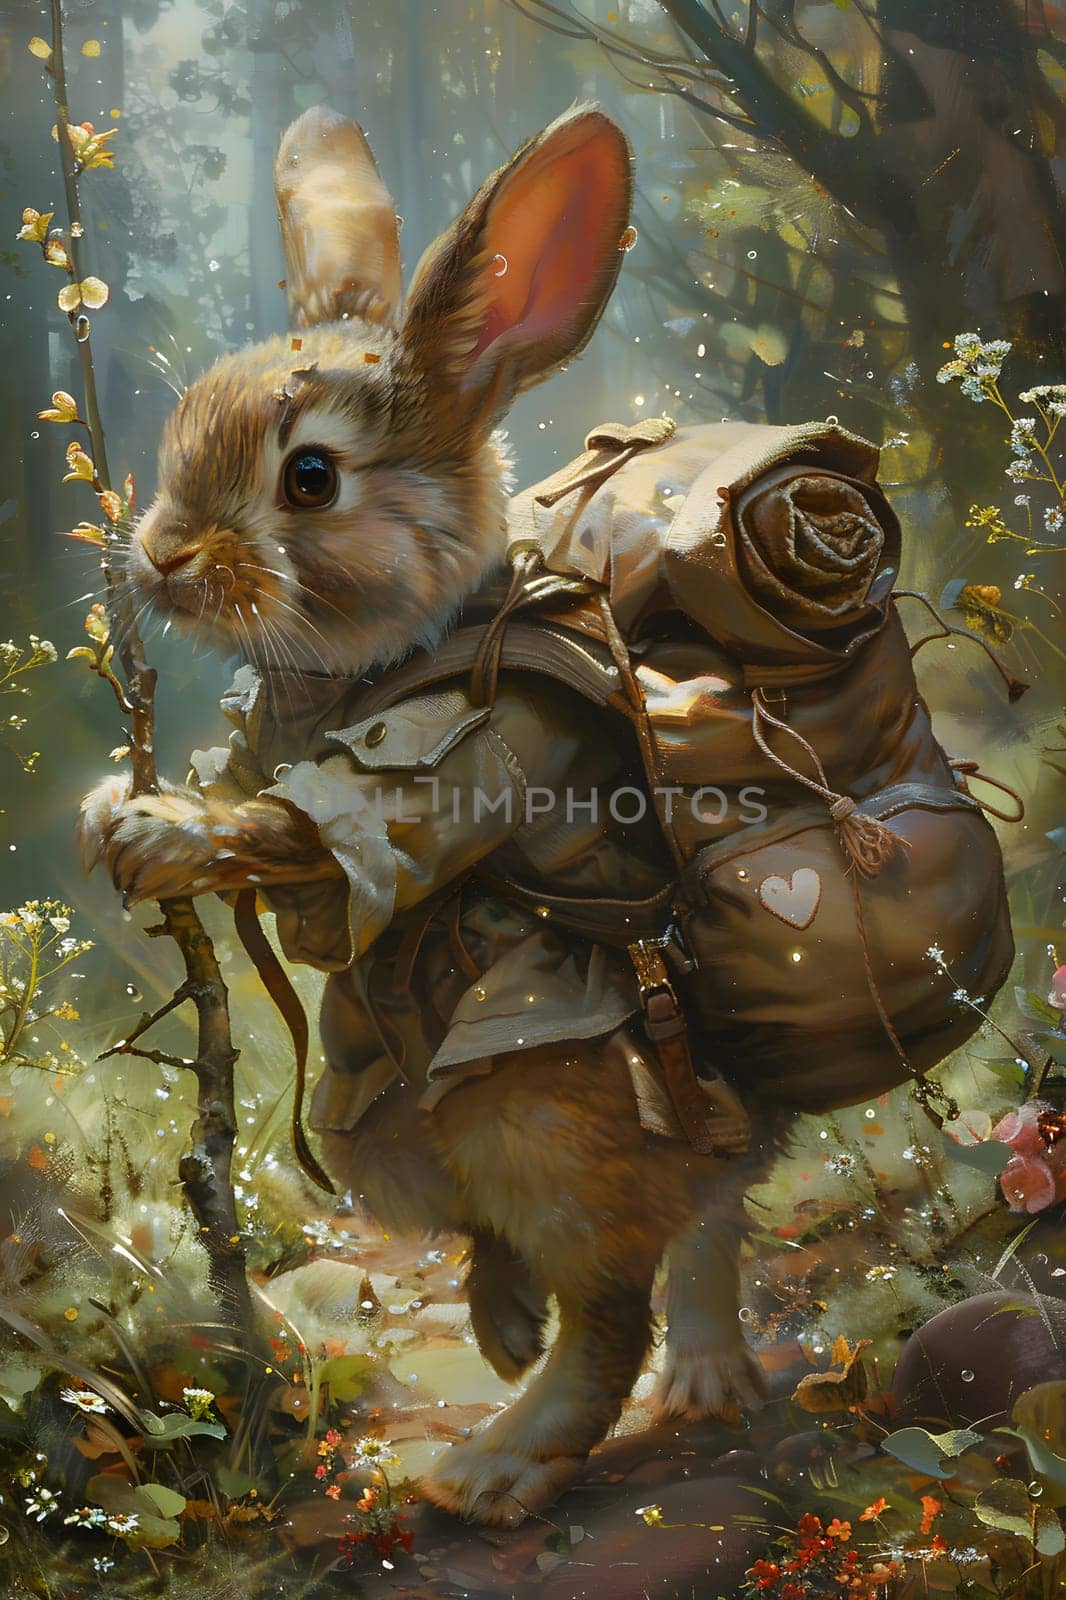 A terrestrial animal, a rabbit, is depicted in an art painting carrying a backpack and a stick. The scene includes grass and a terrestrial plant